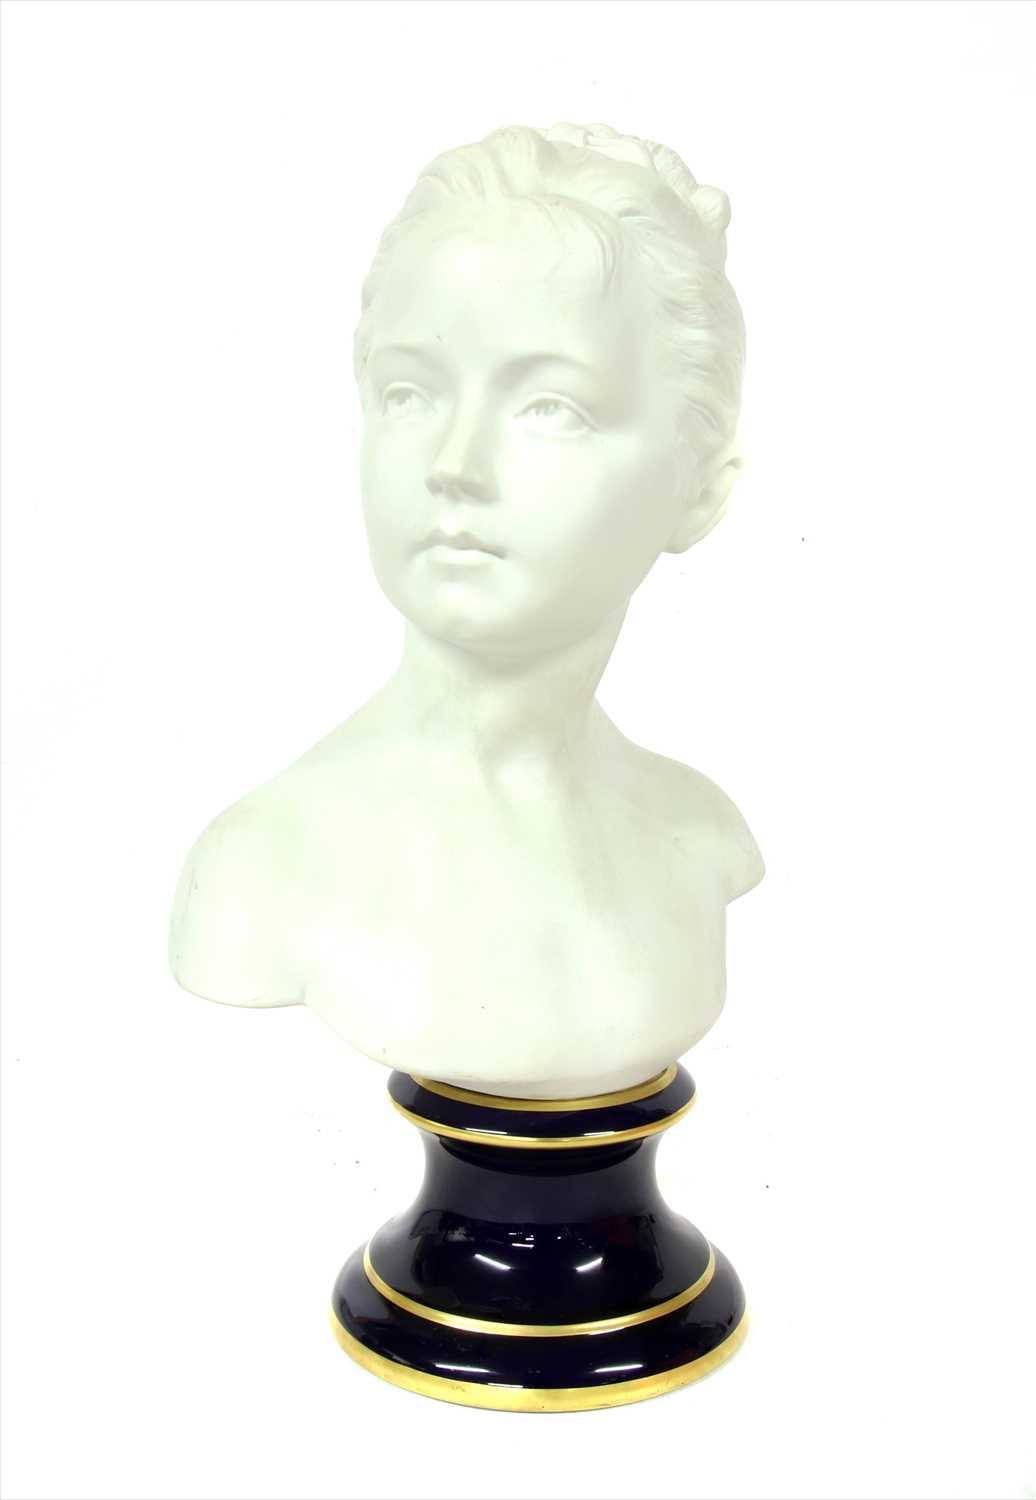 Lot 289 - A Bisque porcelain bust by Limoges